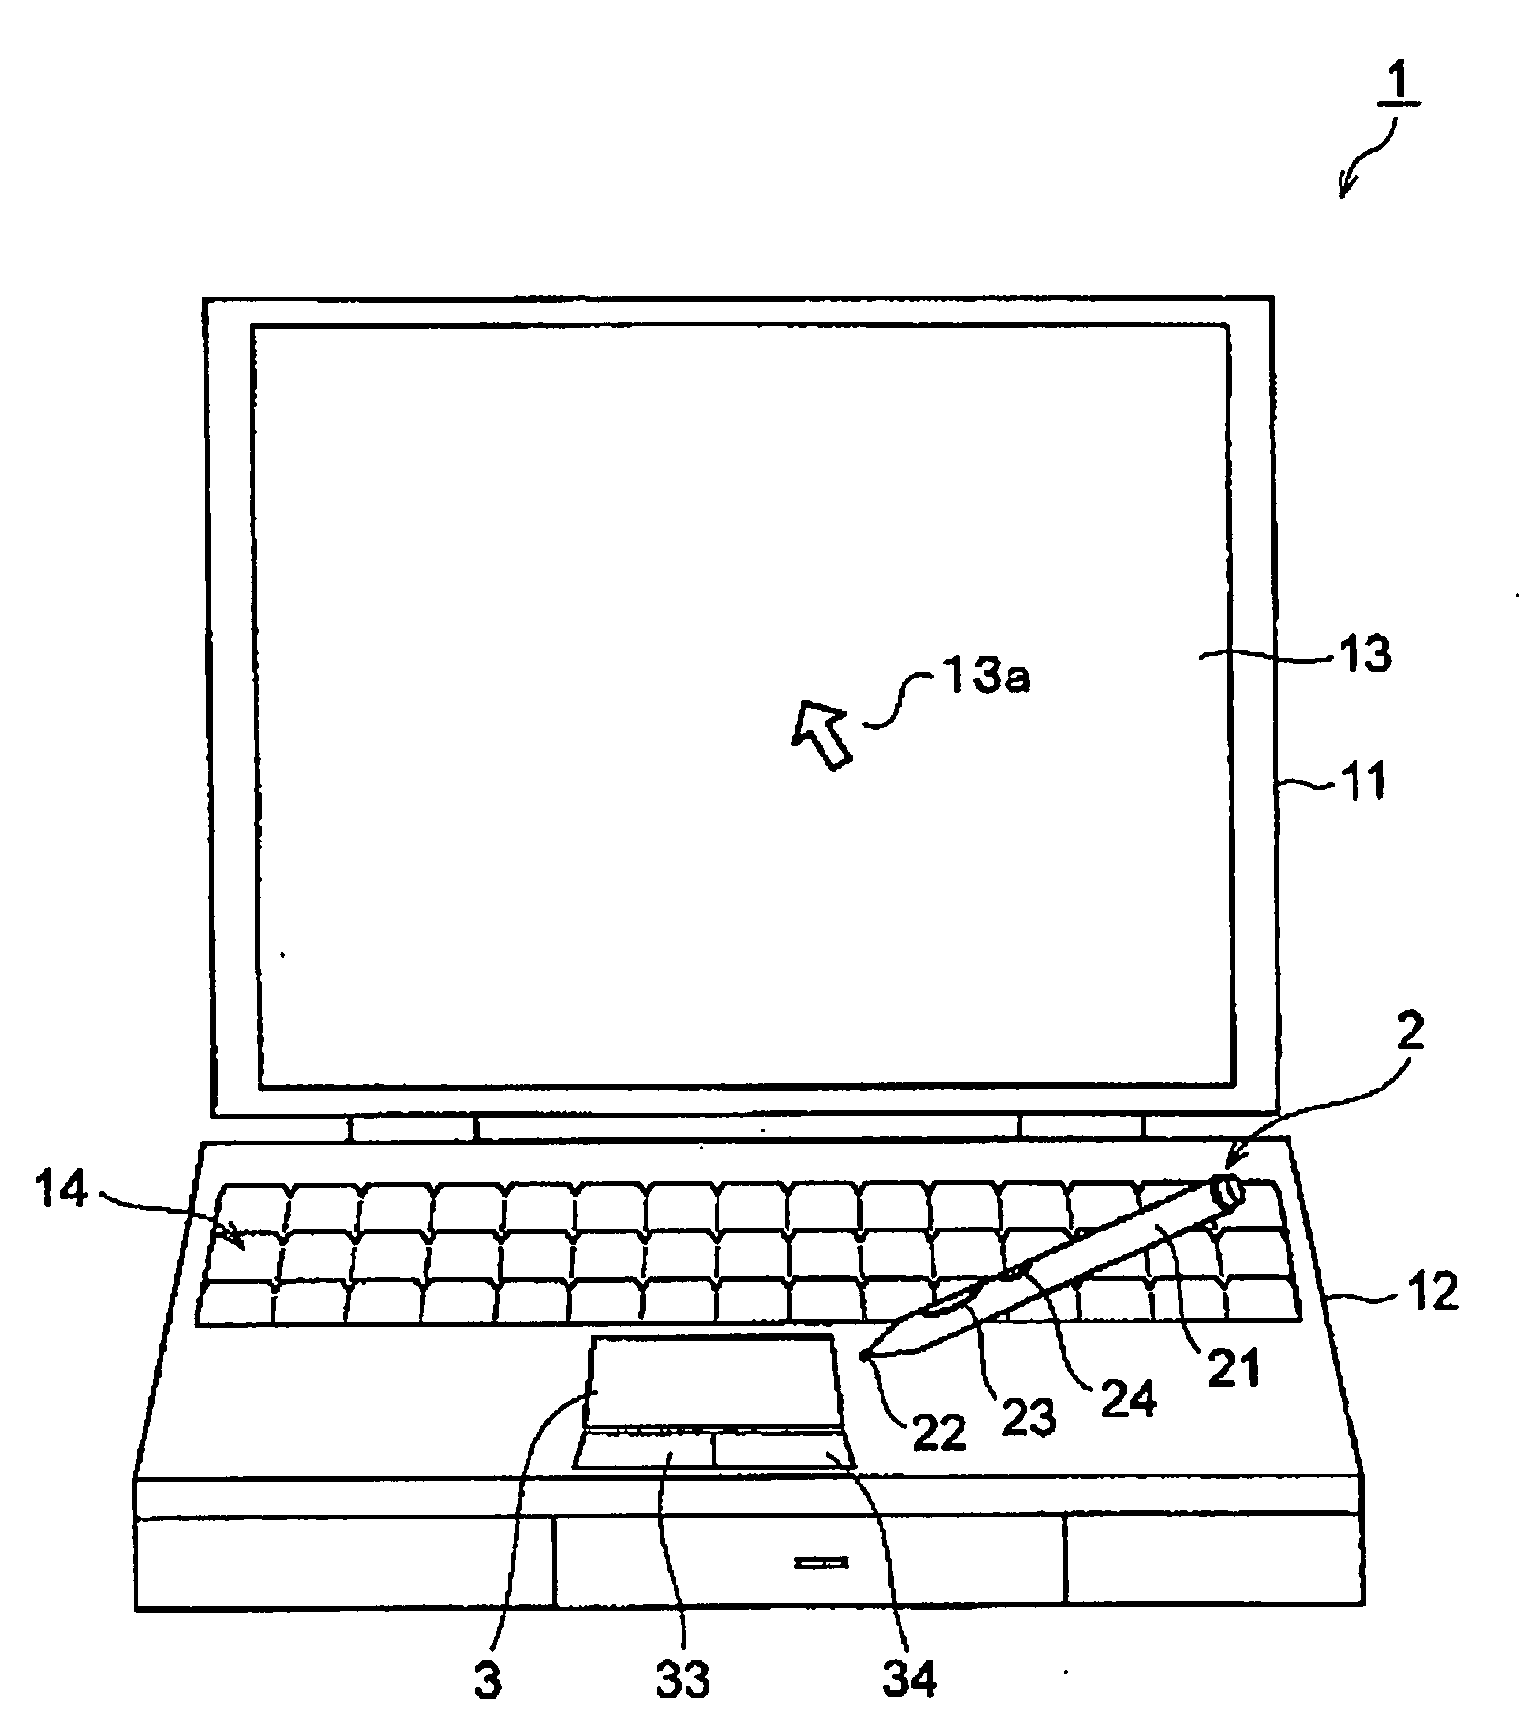 Information processing apparatus, position detecting apparatus and sensing part for performing a detection operation